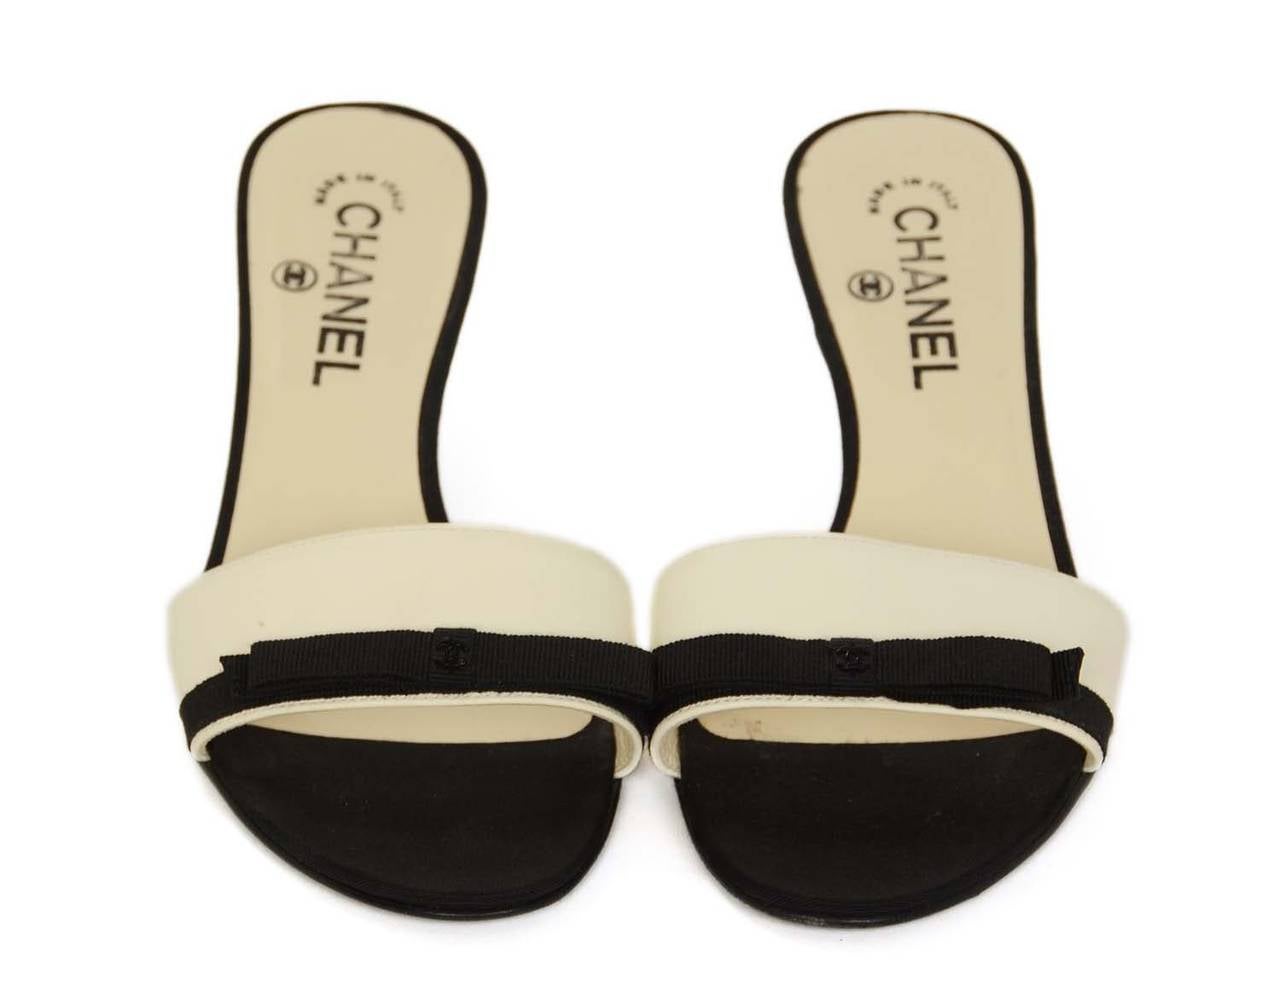 Chanel Black/Cream Mules W/Grosgrain Bow Sz 38

    Made in Italy
    Materials: leather, grosgrain
    Stamped 